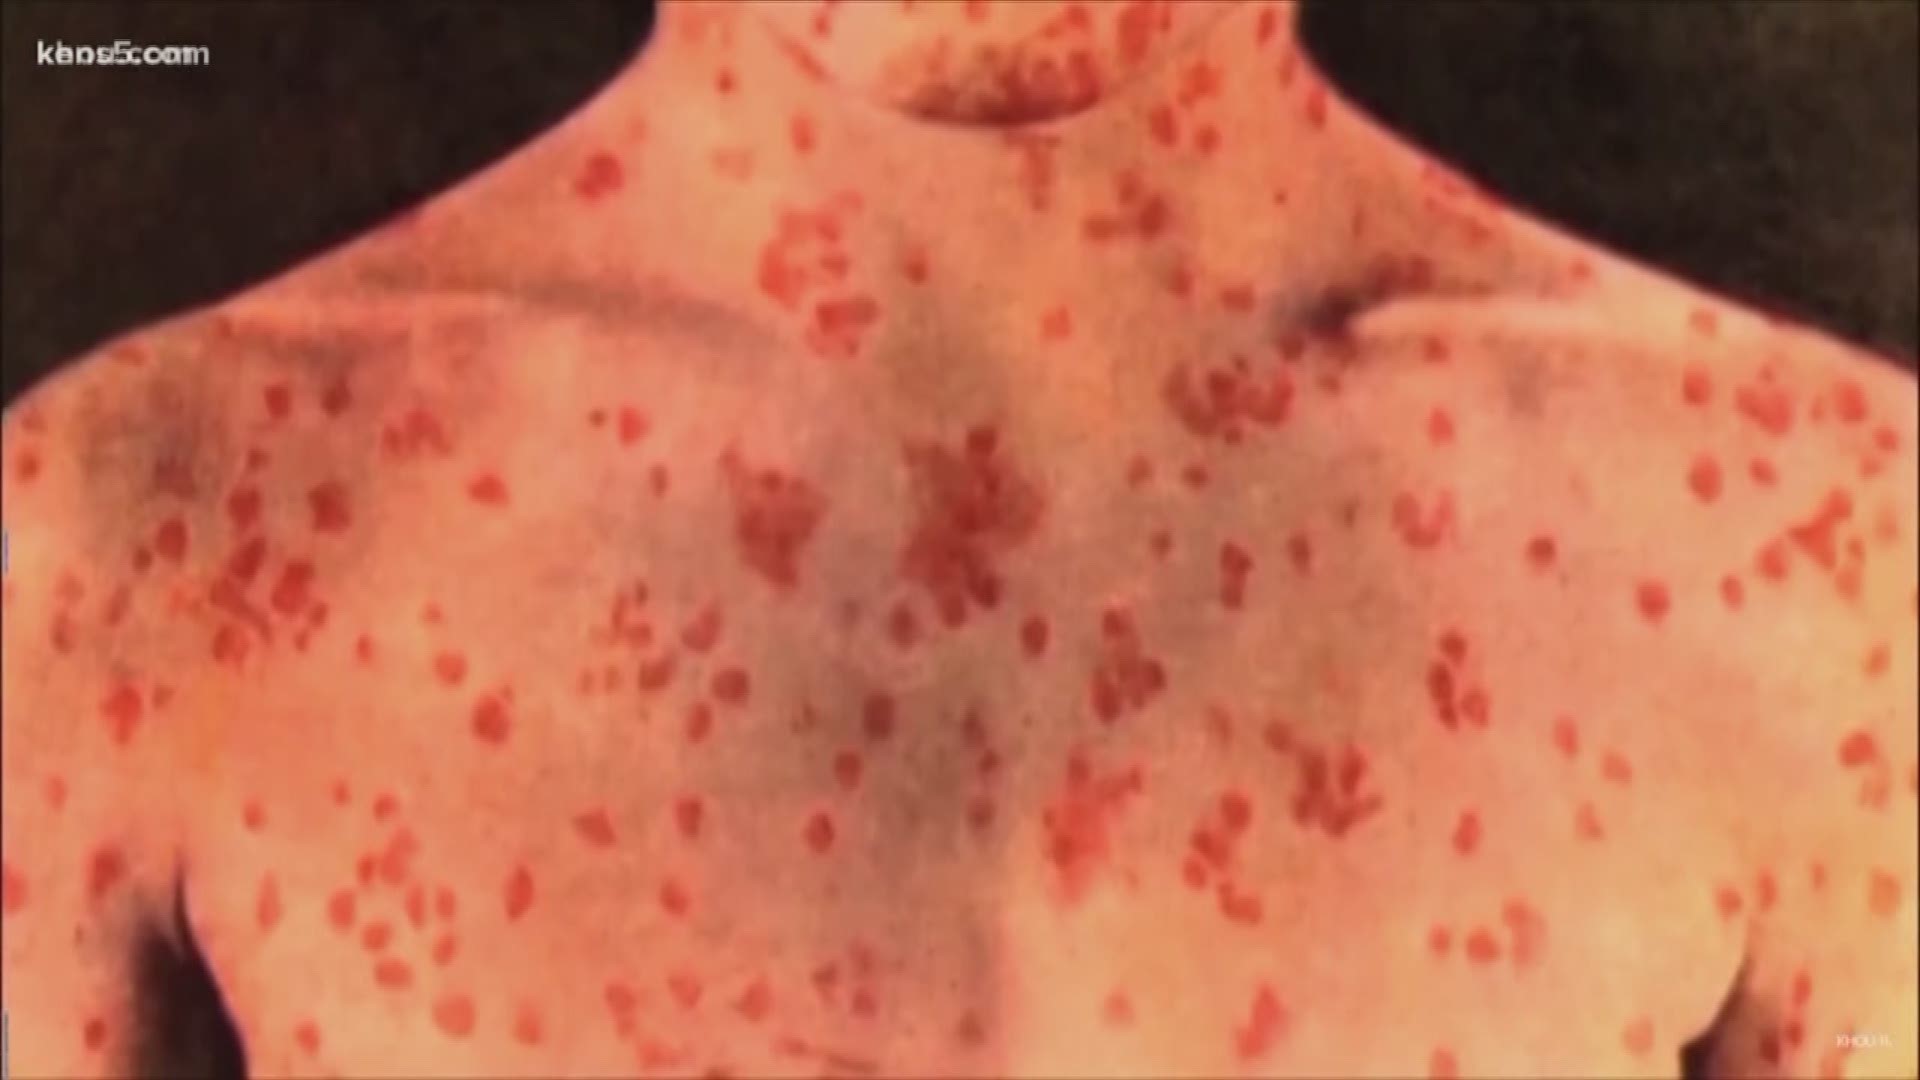 Officials added this is “associated” with a case of measles from Guadalupe County that was confirmed and reported by KENS 5 in early March. The disease had been traveling across the U.S. at a record pace this year; 25 percent of those who get measles end up going to the hospital.